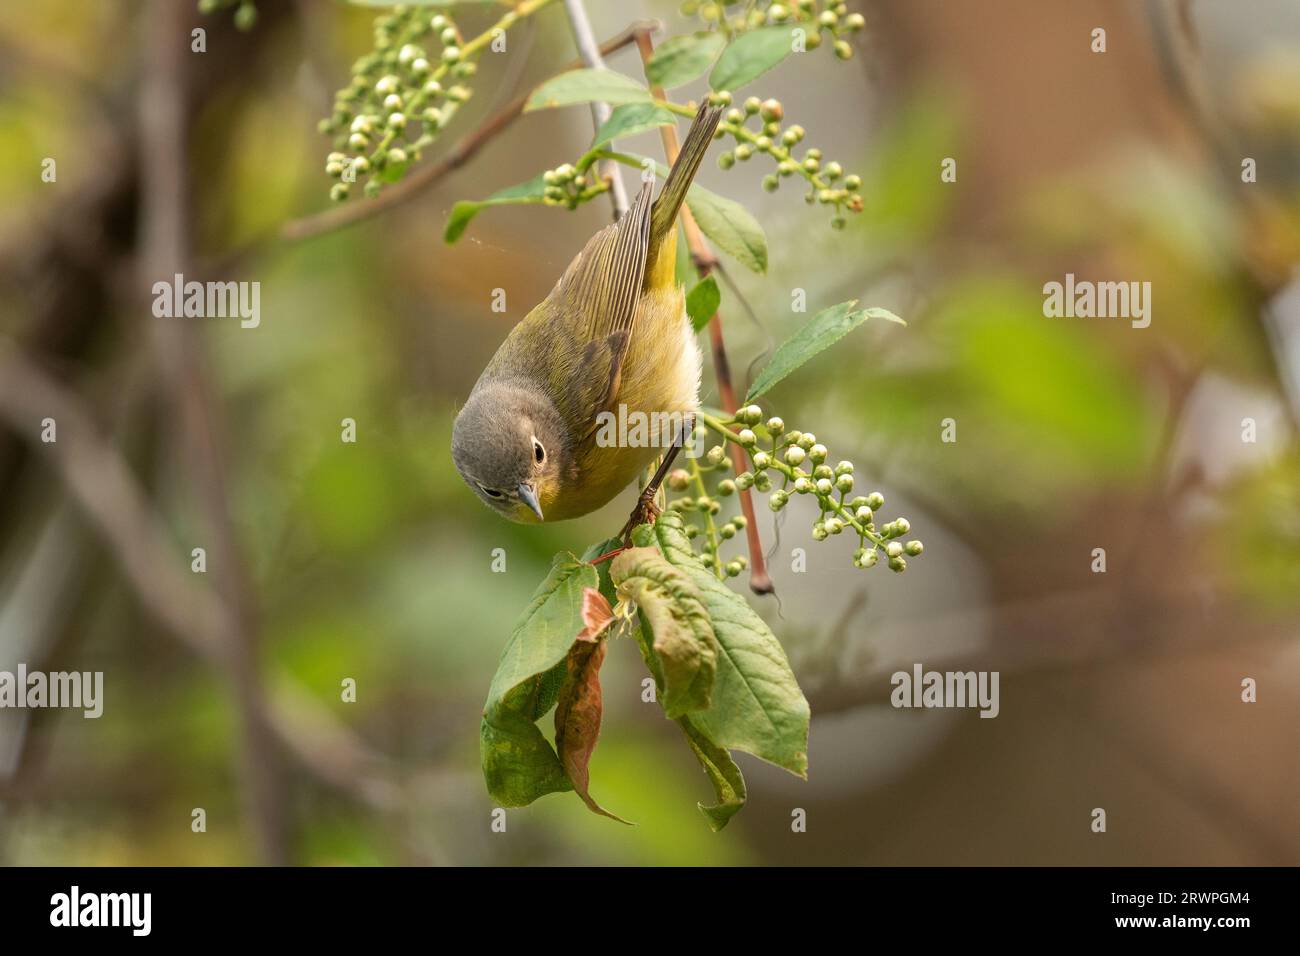 Closeup of Nashville Warbler perching on a leafy branch during spring migration, Ontario, Canada Stock Photo